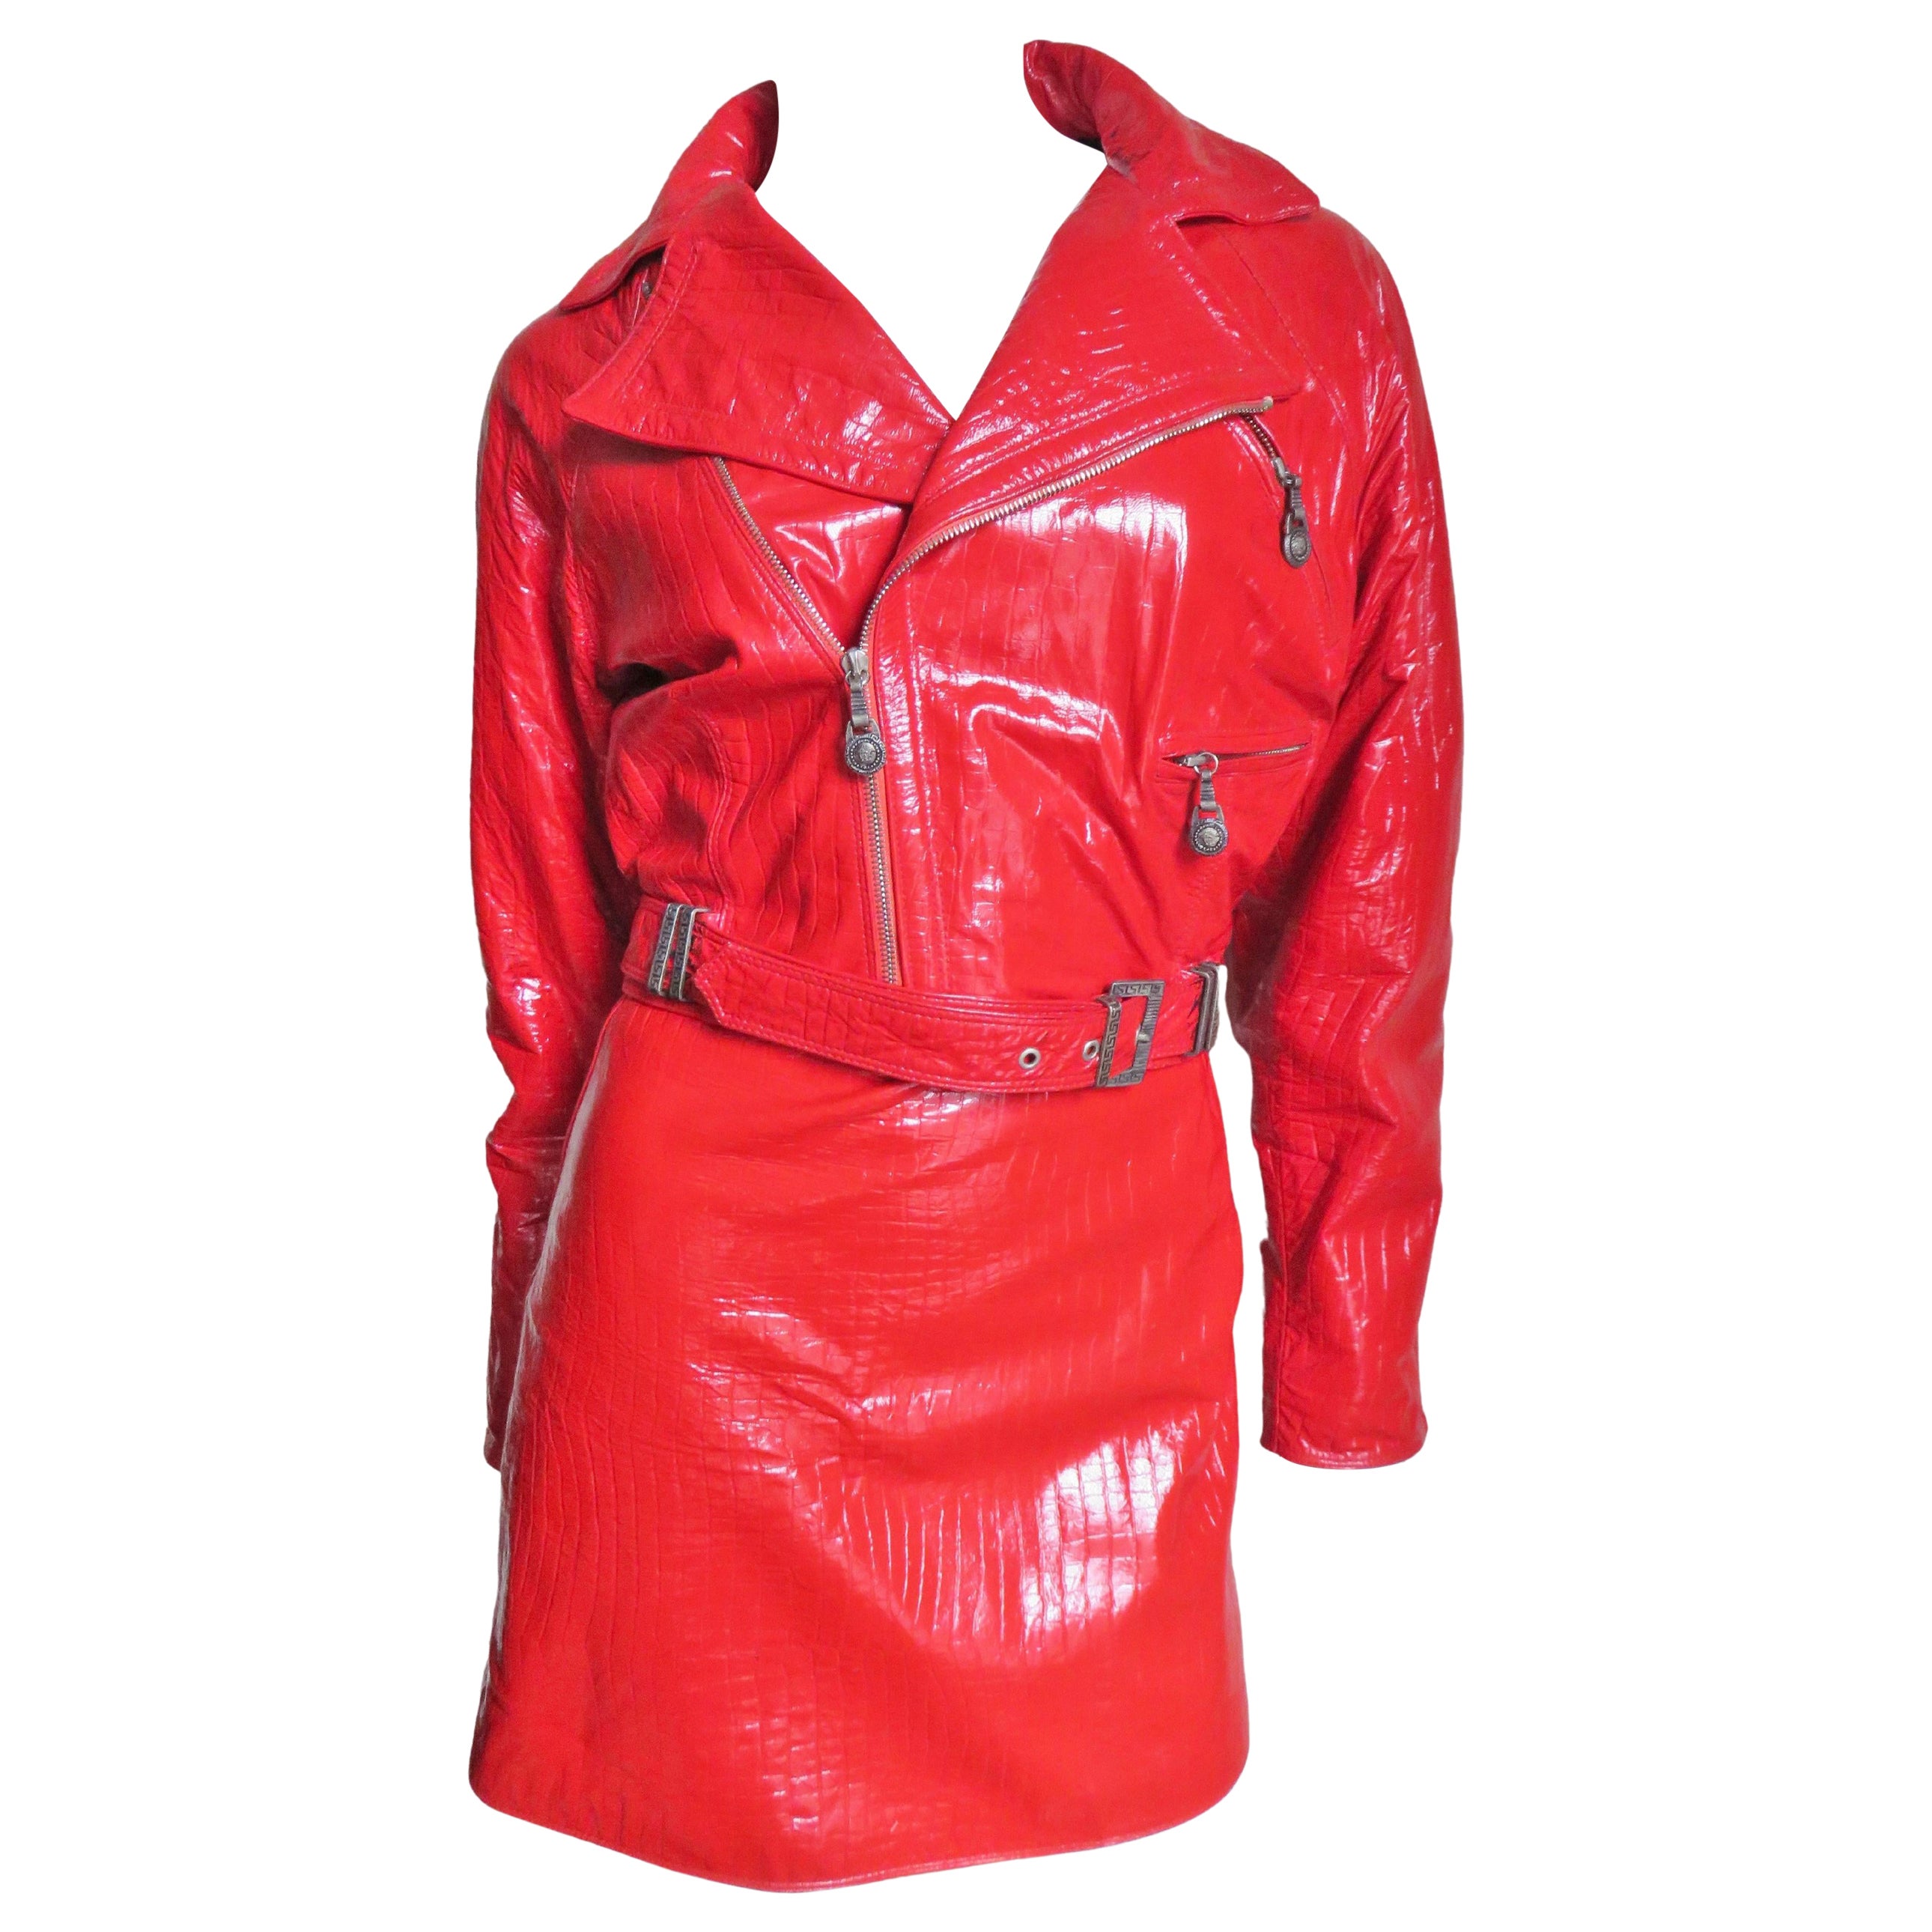 Gianni Versace Red Leather Motorcycle Jacket and Skirt A/W 1994 For Sale